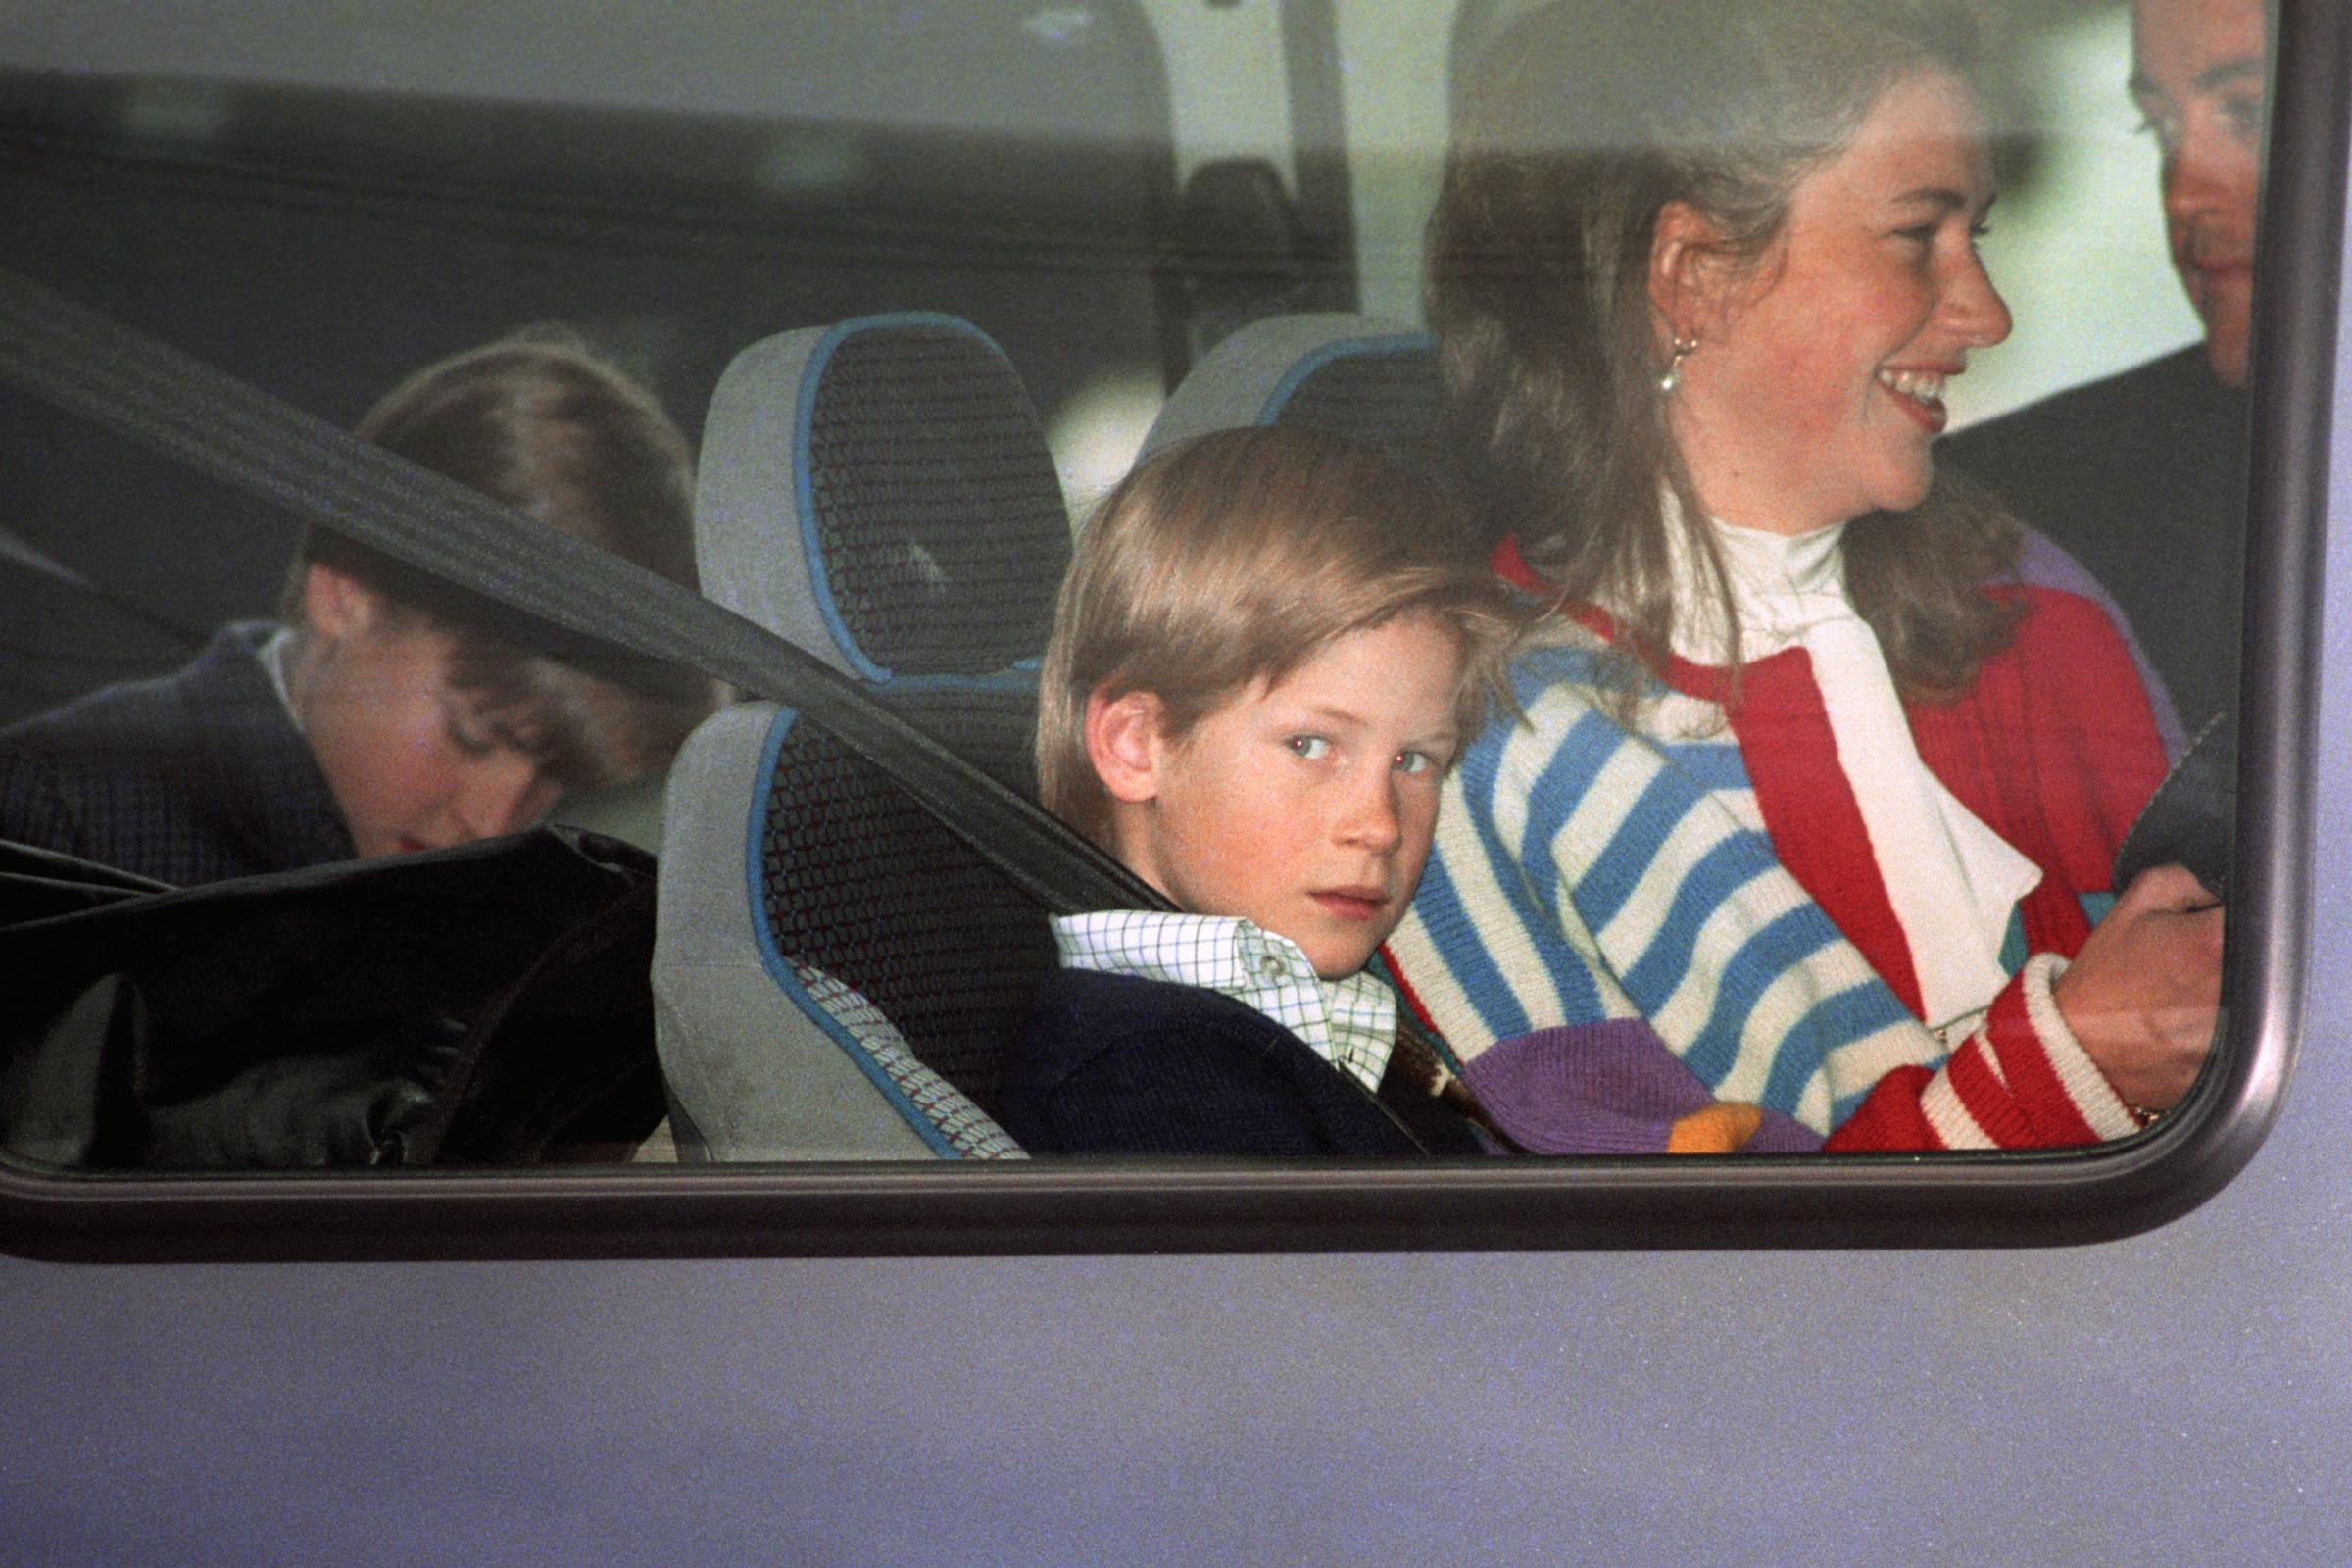 File photo dated 26/10/1993 of Prince William, Prince Harry with Tiggy Legge-Bourke arriving at Heathrow Airport. The BBC has agreed to pay substantial damages to the Duke of Cambridges ex-nanny Tiggy Legge-Bourke over false and malicious